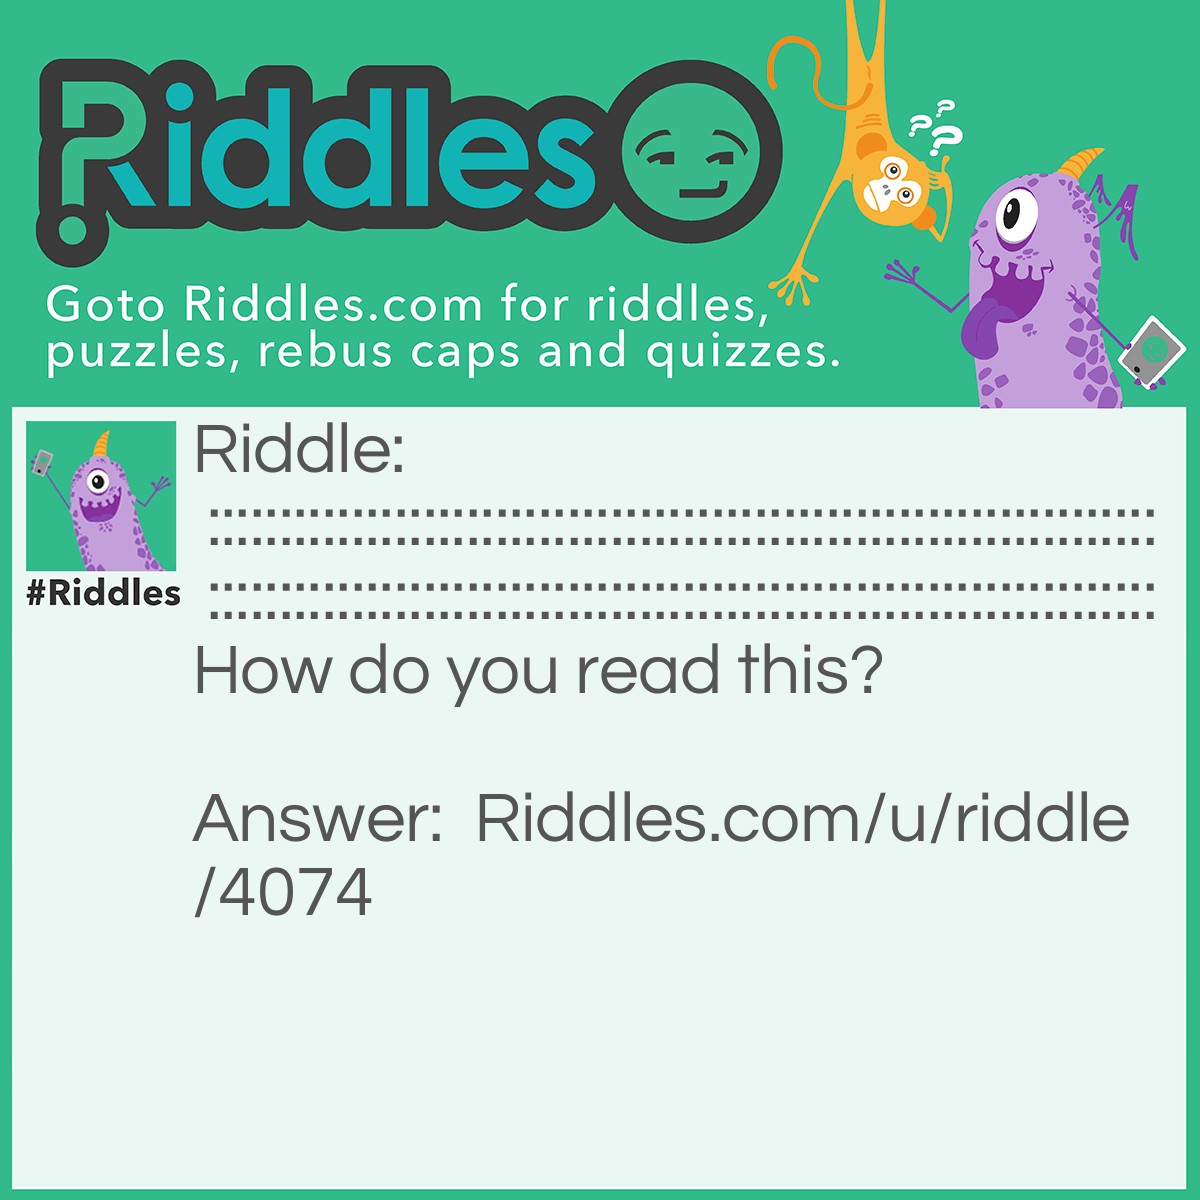 Riddle: :::::::::::::::::::::::::::::::::::::::::::::::::::::::::::::::::: :::::::::::::::::::::::::::::::::::::::::::::::::::::::::::::::::: How do you read this? Answer: By feeling the bumps.